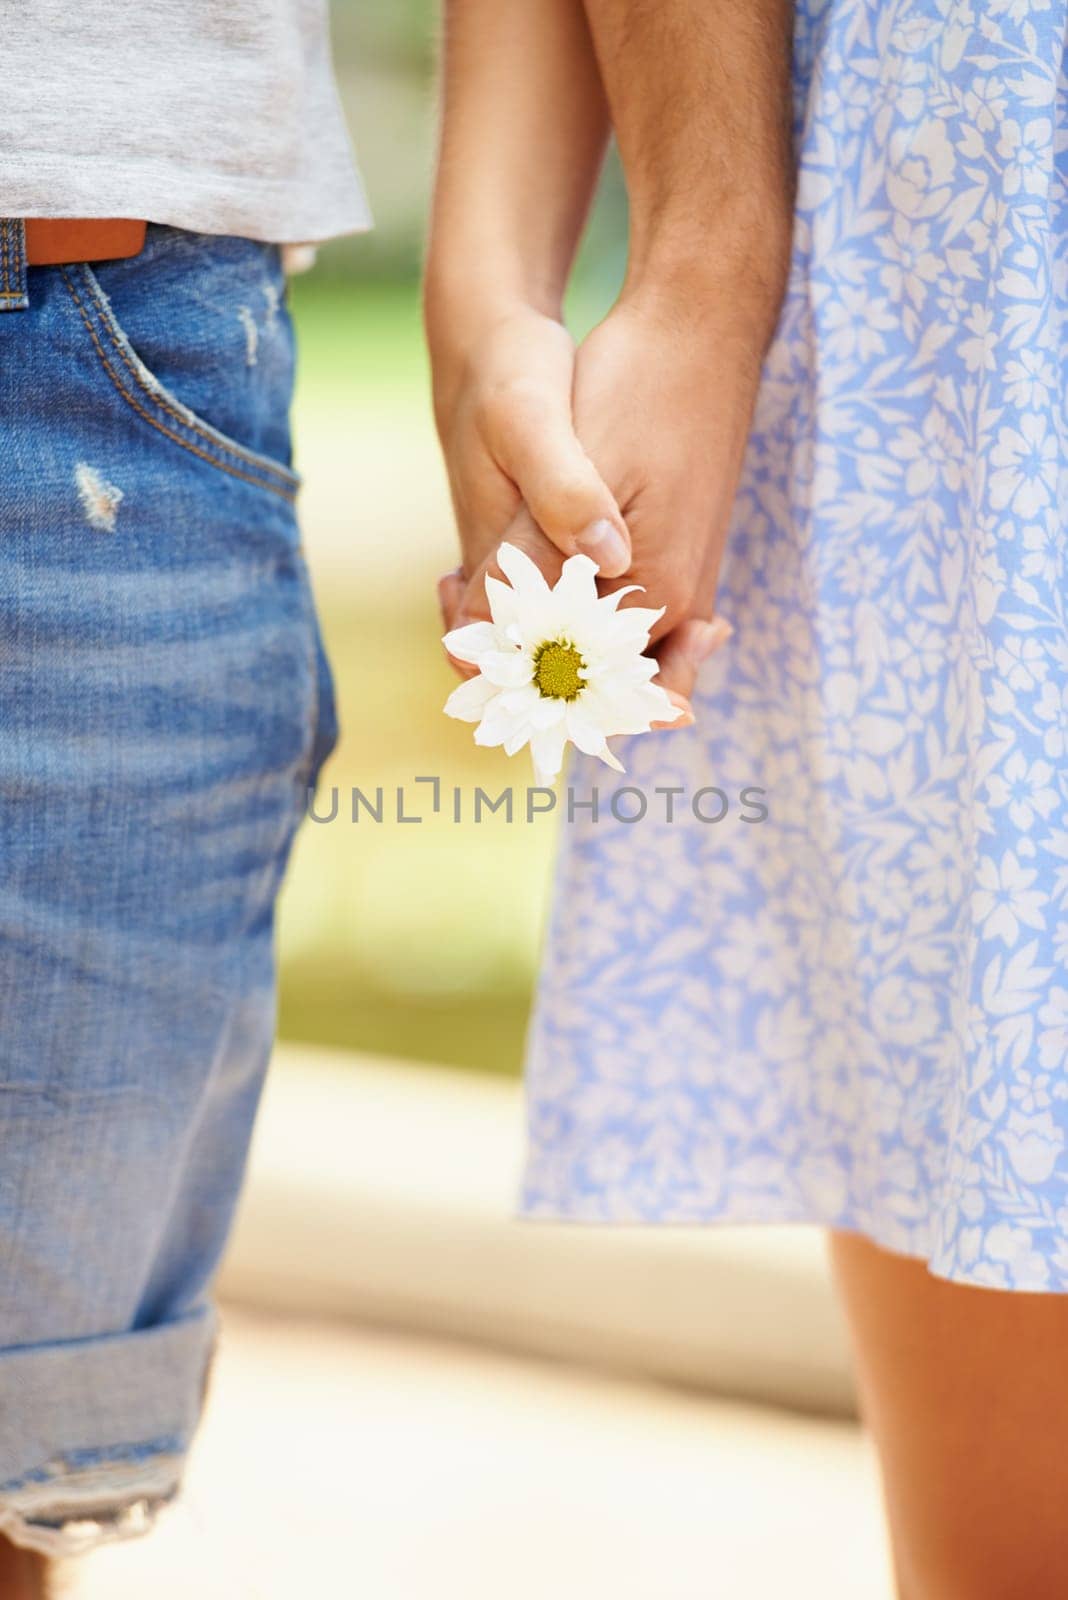 Holding hands, flower or closeup of couple on outdoor date for support, care or love in nature together. Walking, romantic man or woman with pride on holiday vacation for fun bond, travel or wellness.